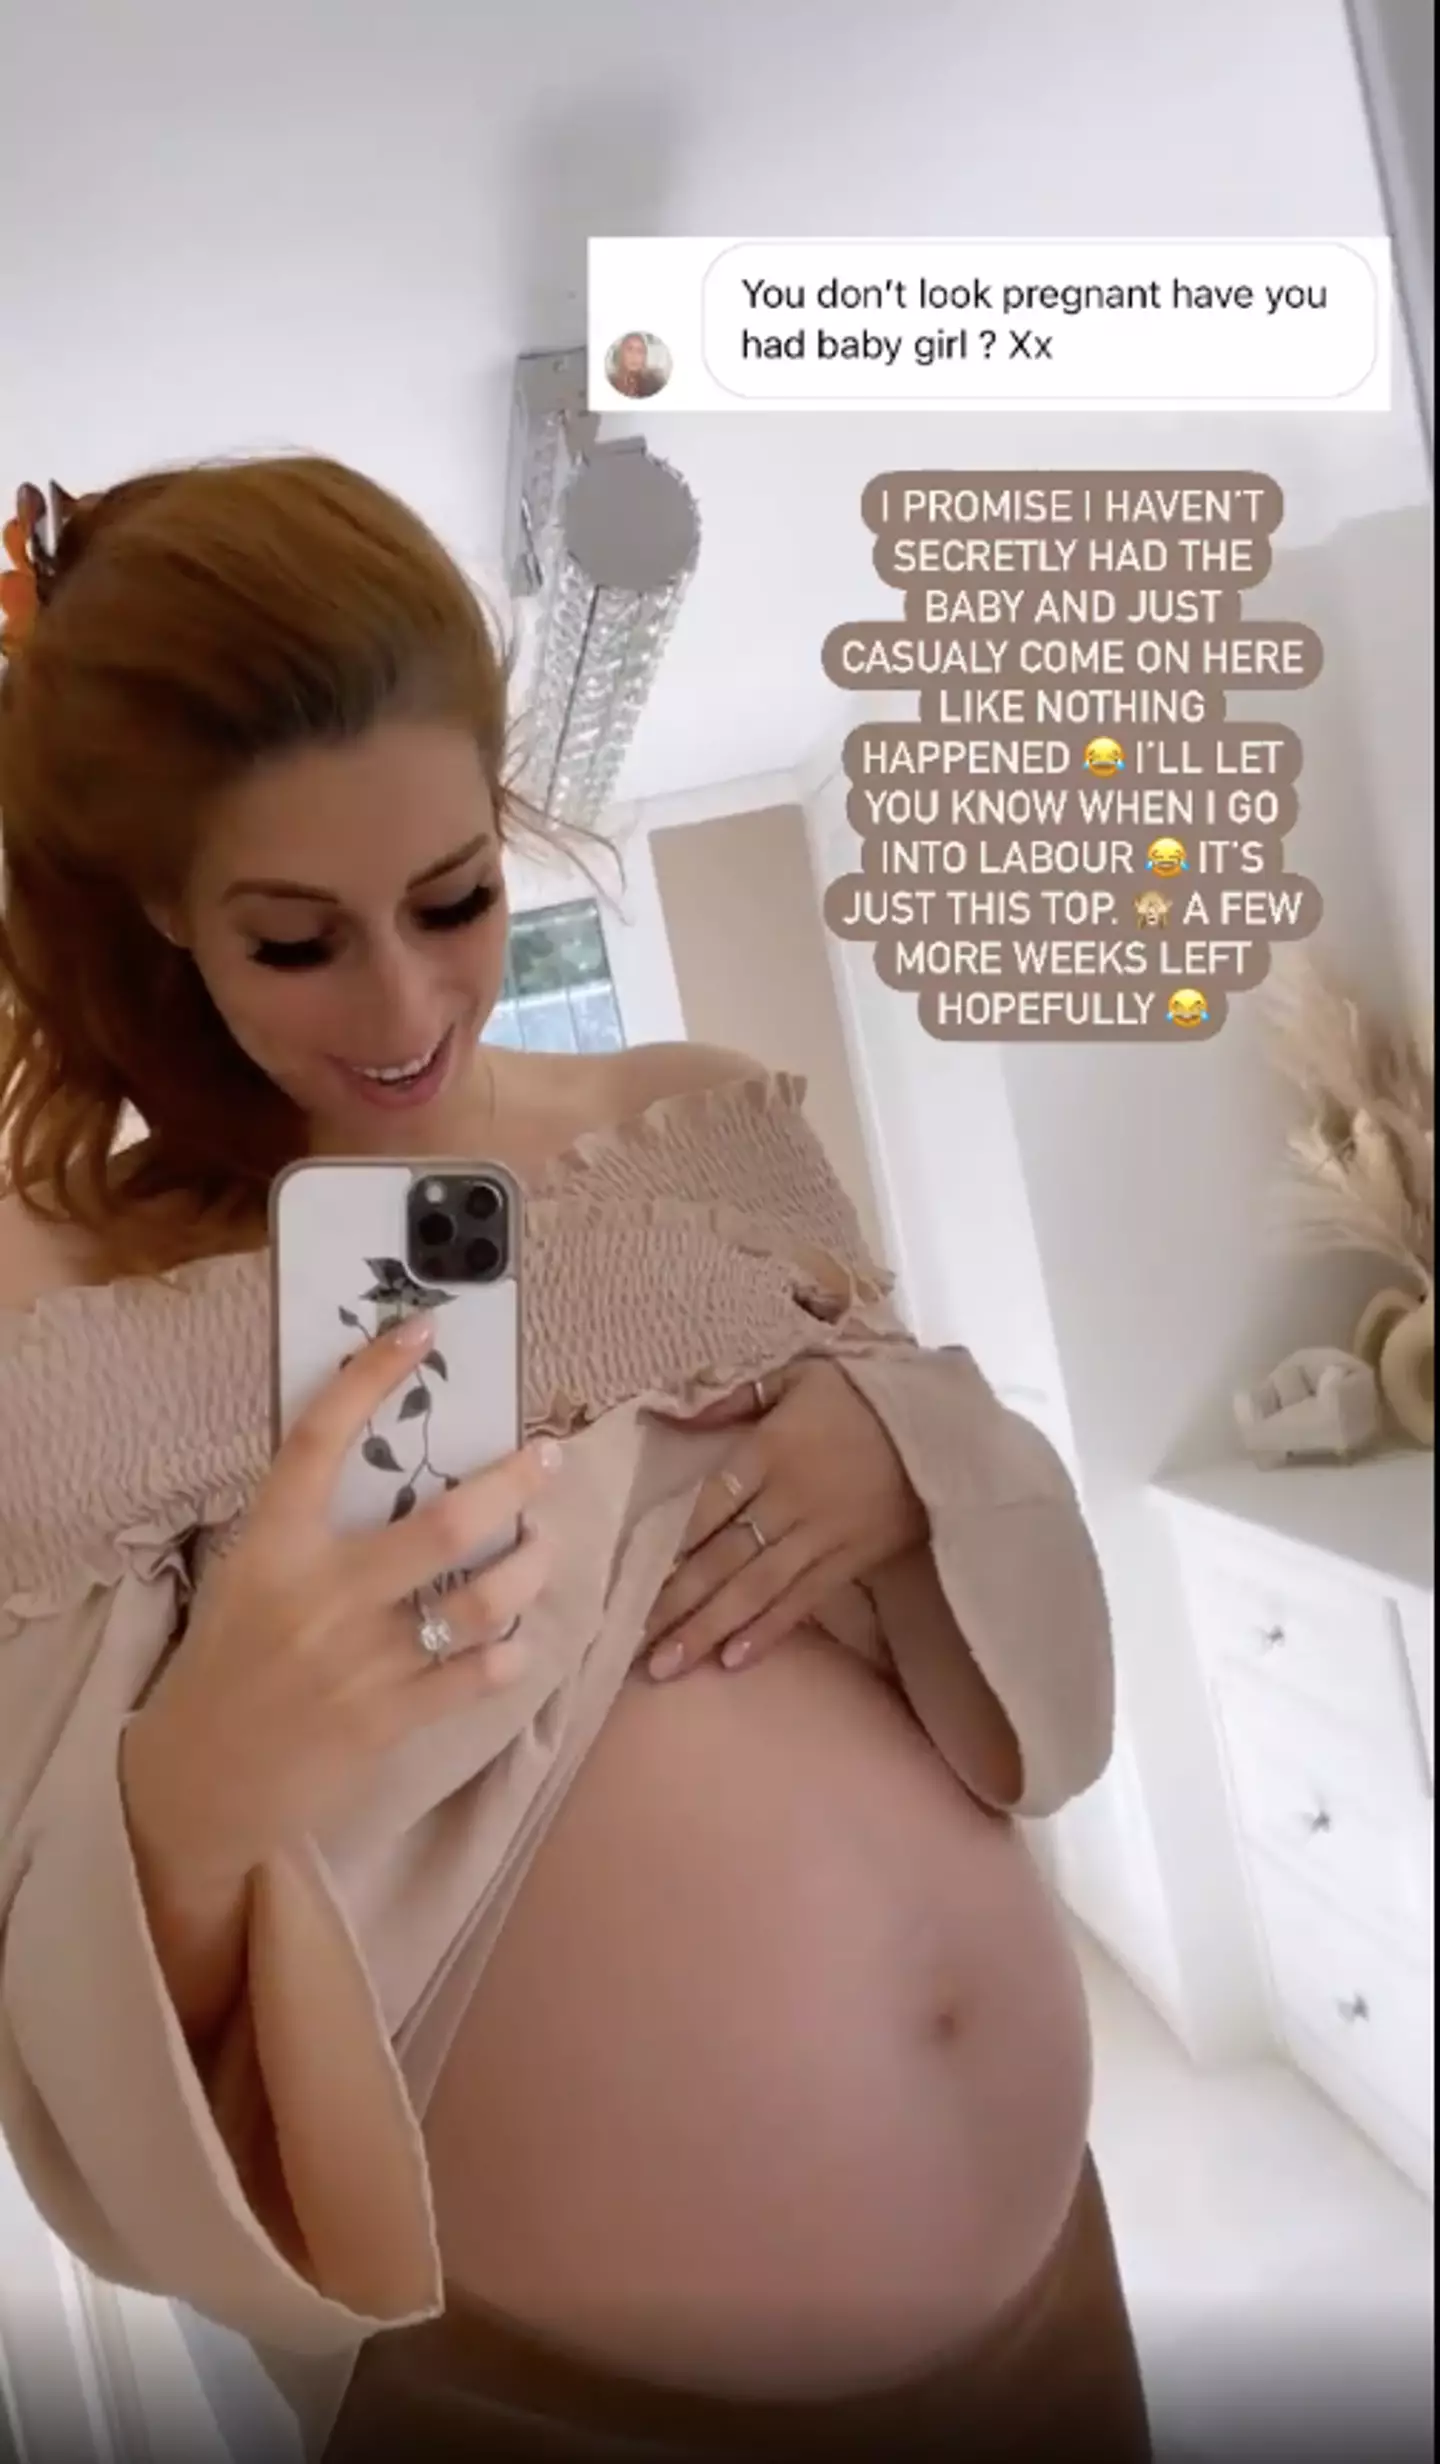 Stacey showed off her bump, explaining it was just her top (